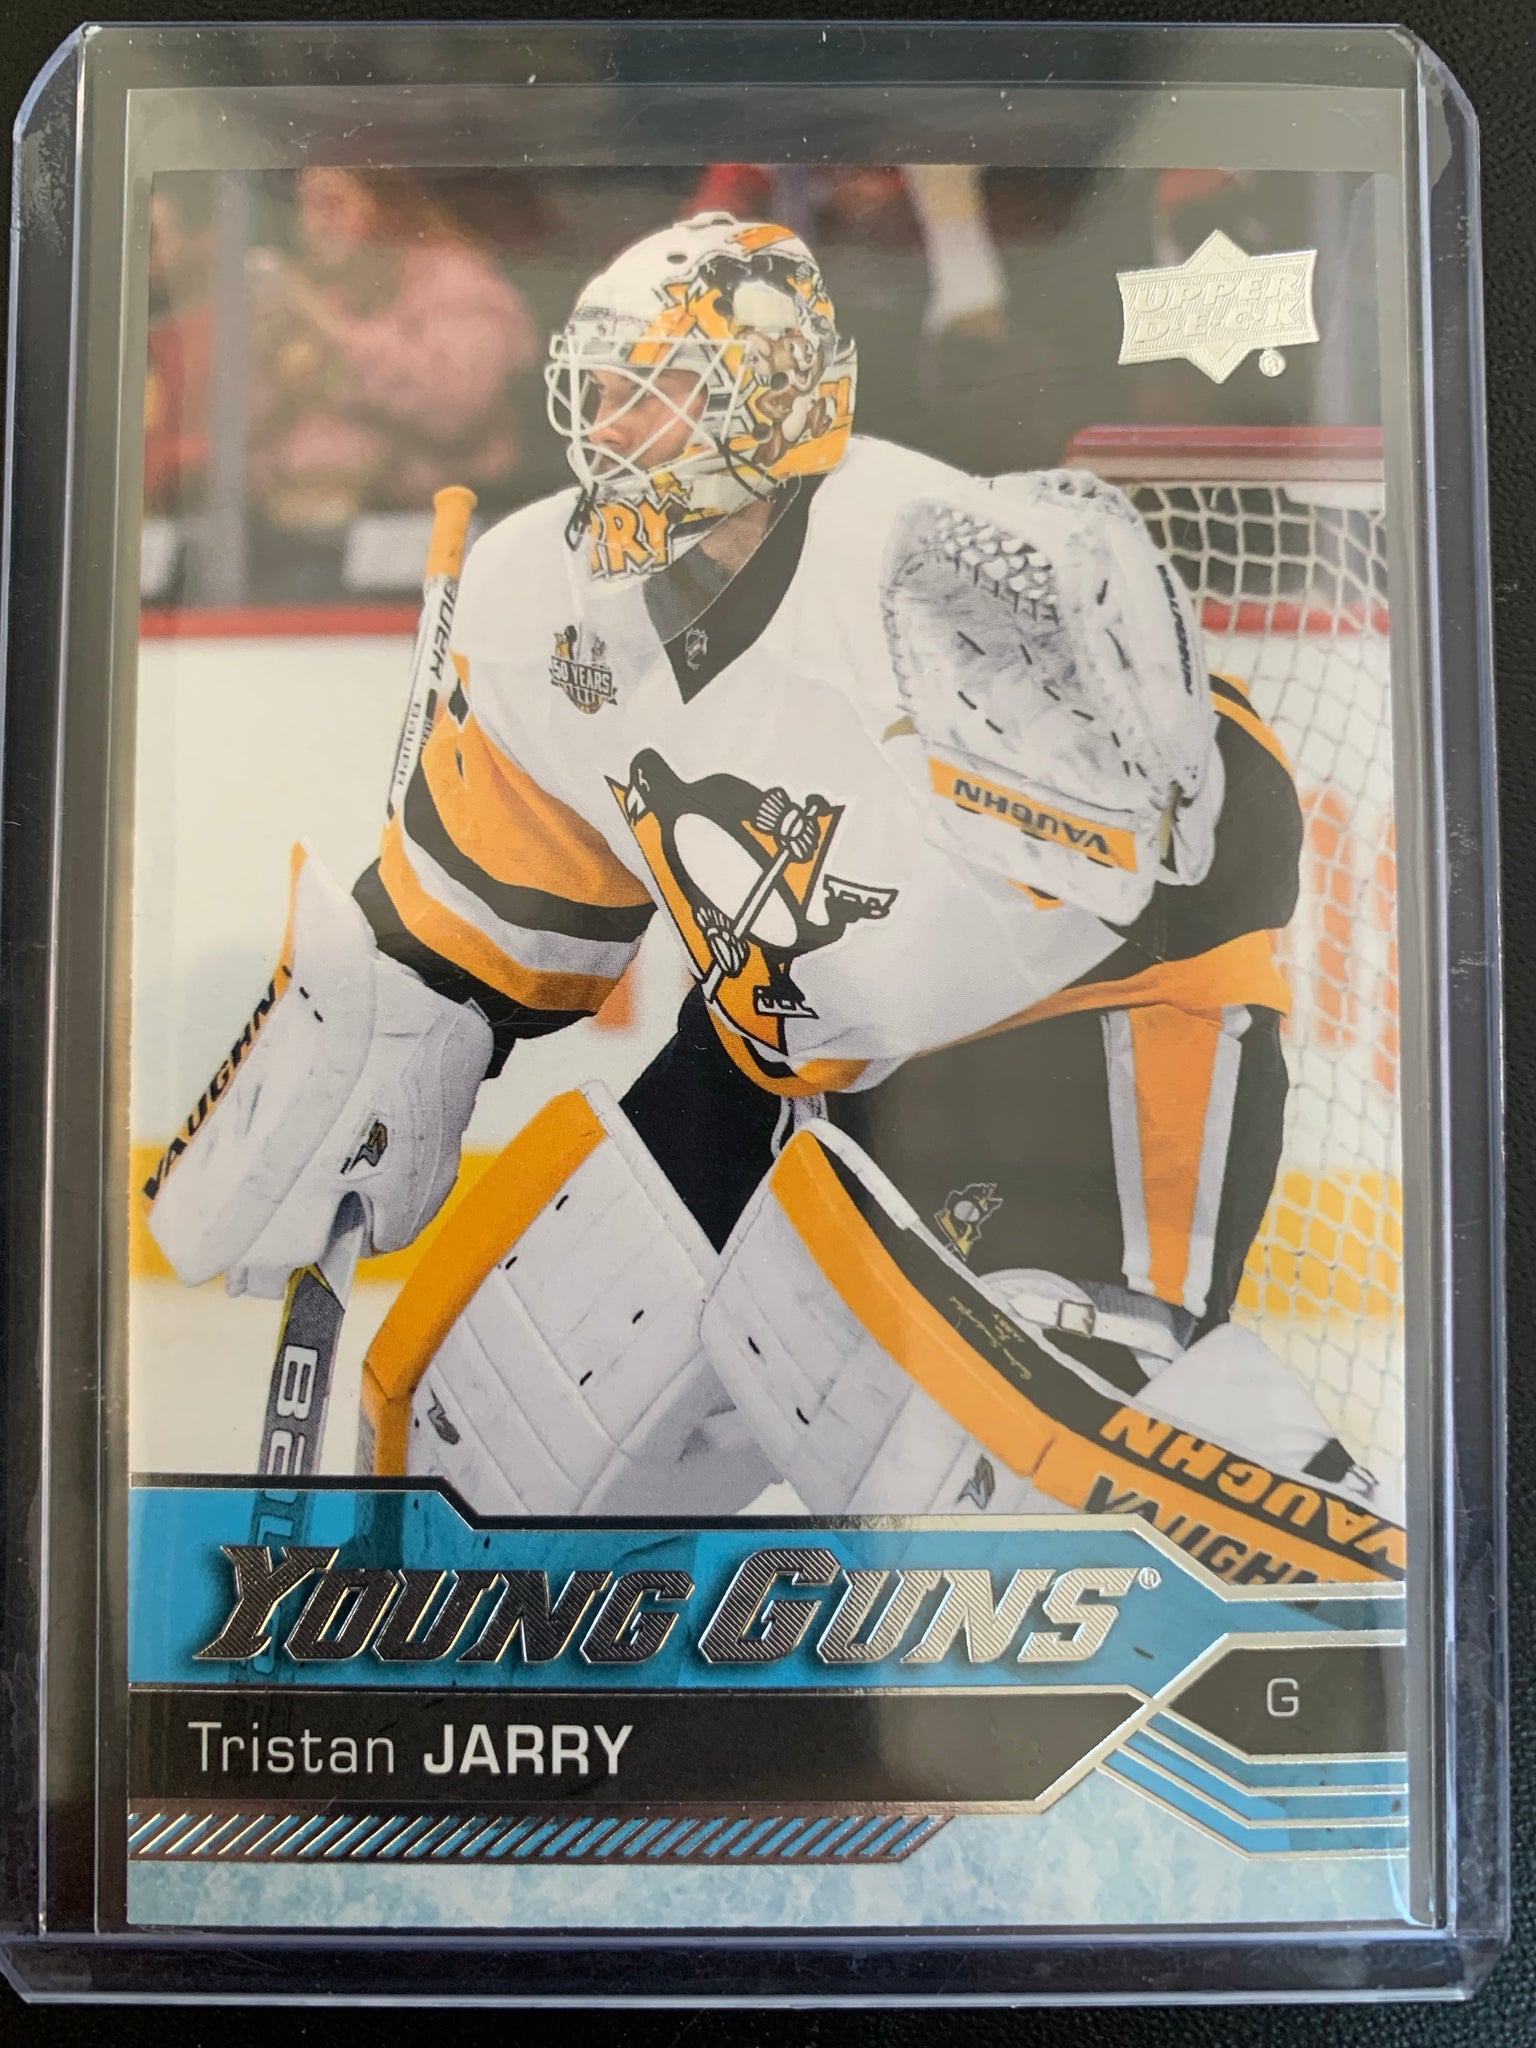 2016-17 UPPER DECK HOCKEY #466 PITTSBURGH PENGUINS - TRISTAN JARRY YOUNG GUNS ROOKIE CARD